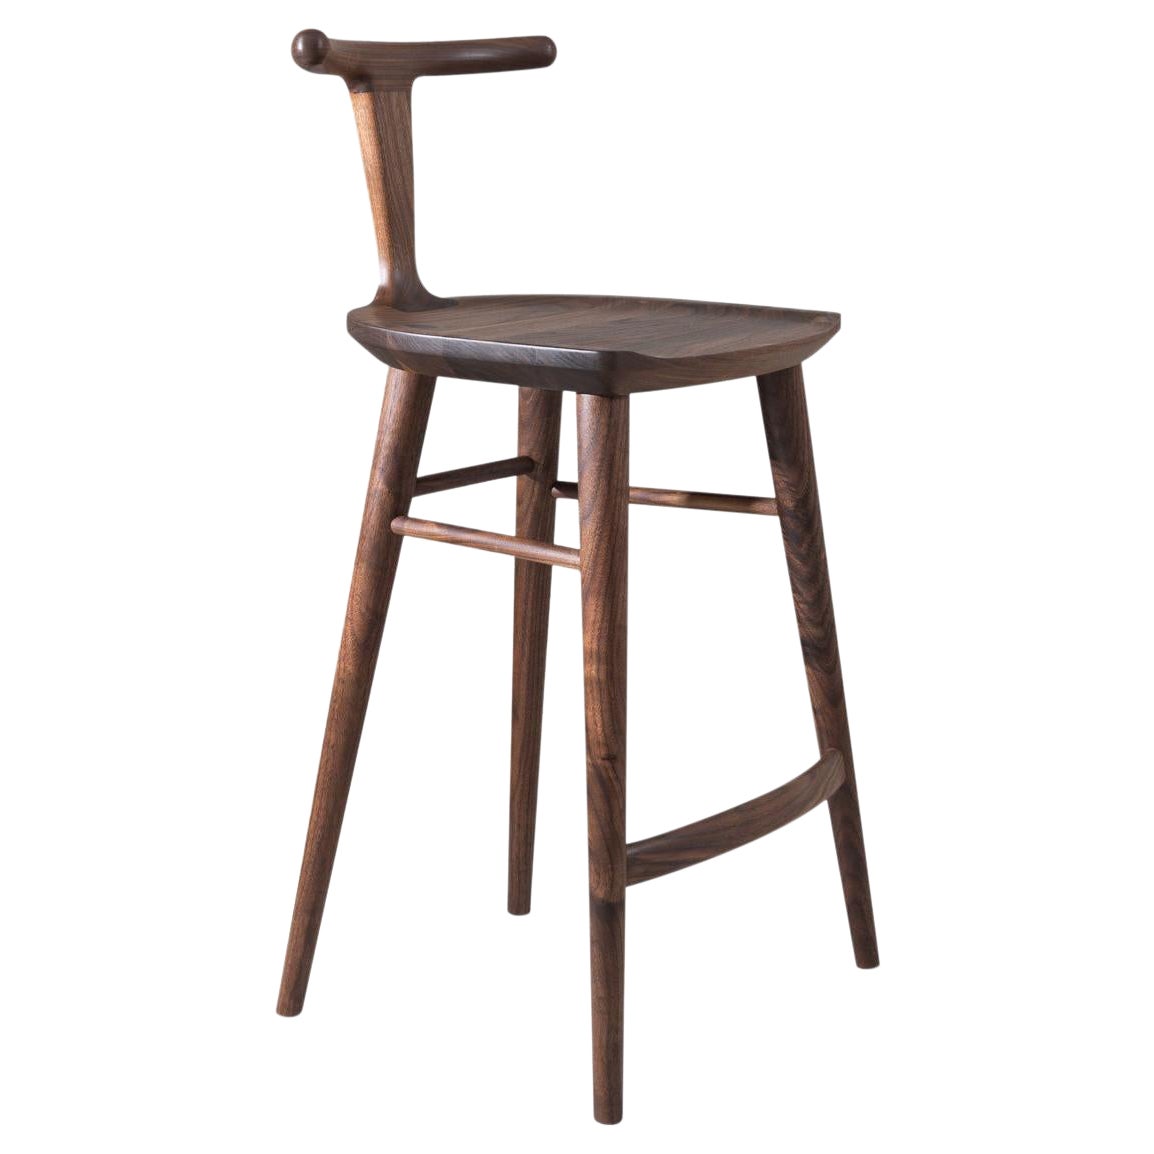 Oxbend Stool, Bar, or Counter Seat in Walnut